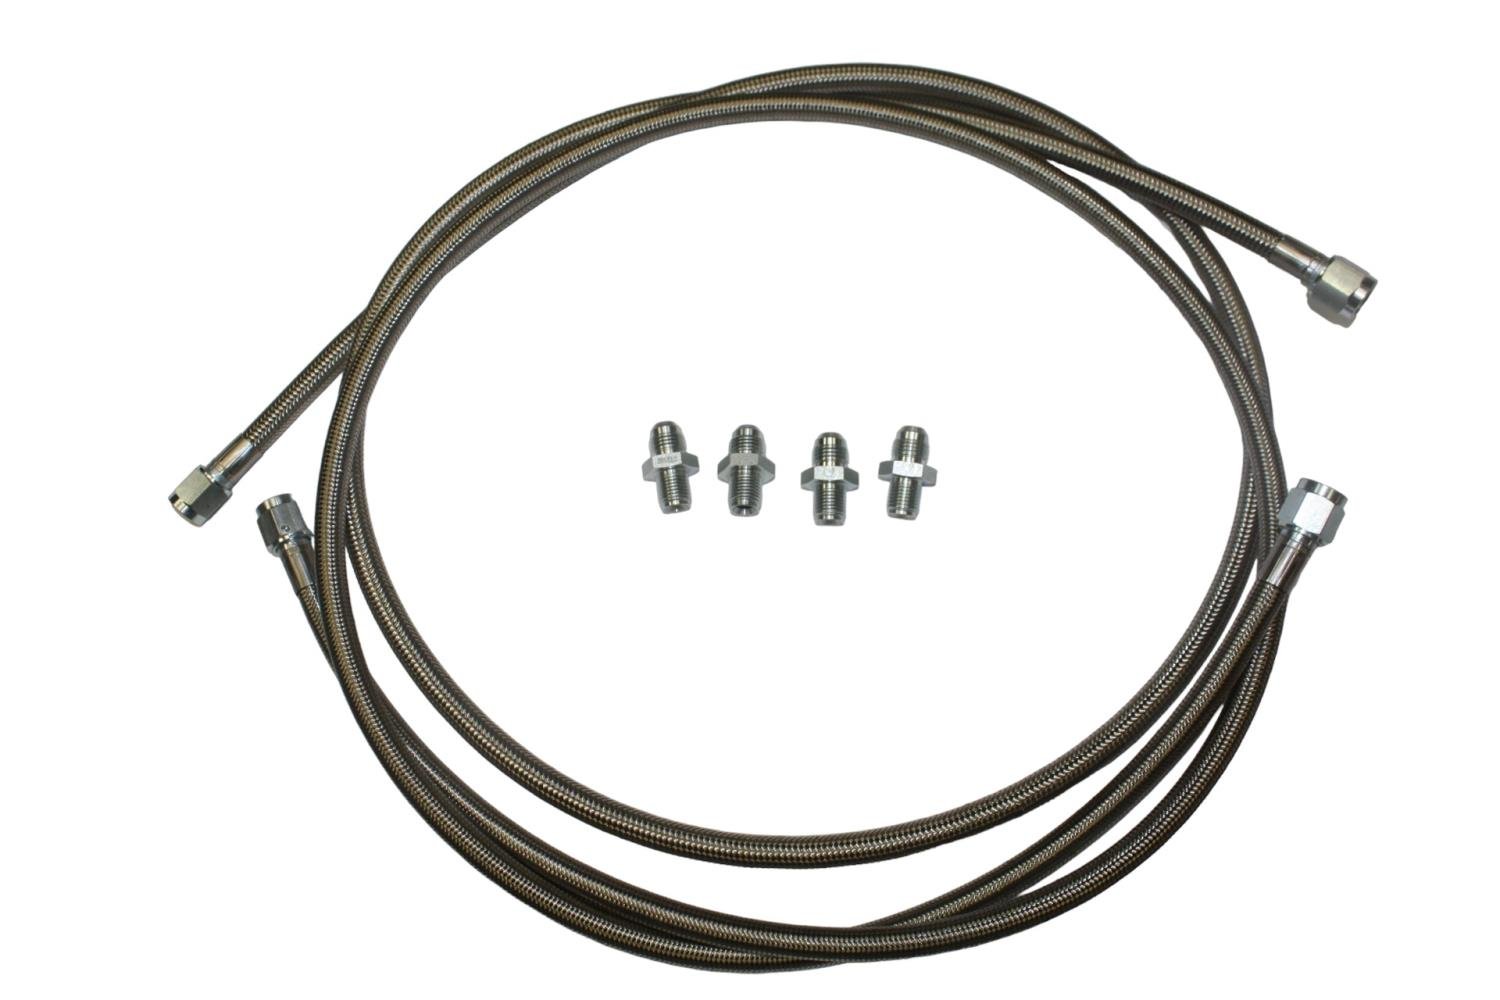 23-1500-60 RADAKOOL Automatic Transmission Cooler Lines for TH350, TH400, 700R Transmissions [5 ft.]